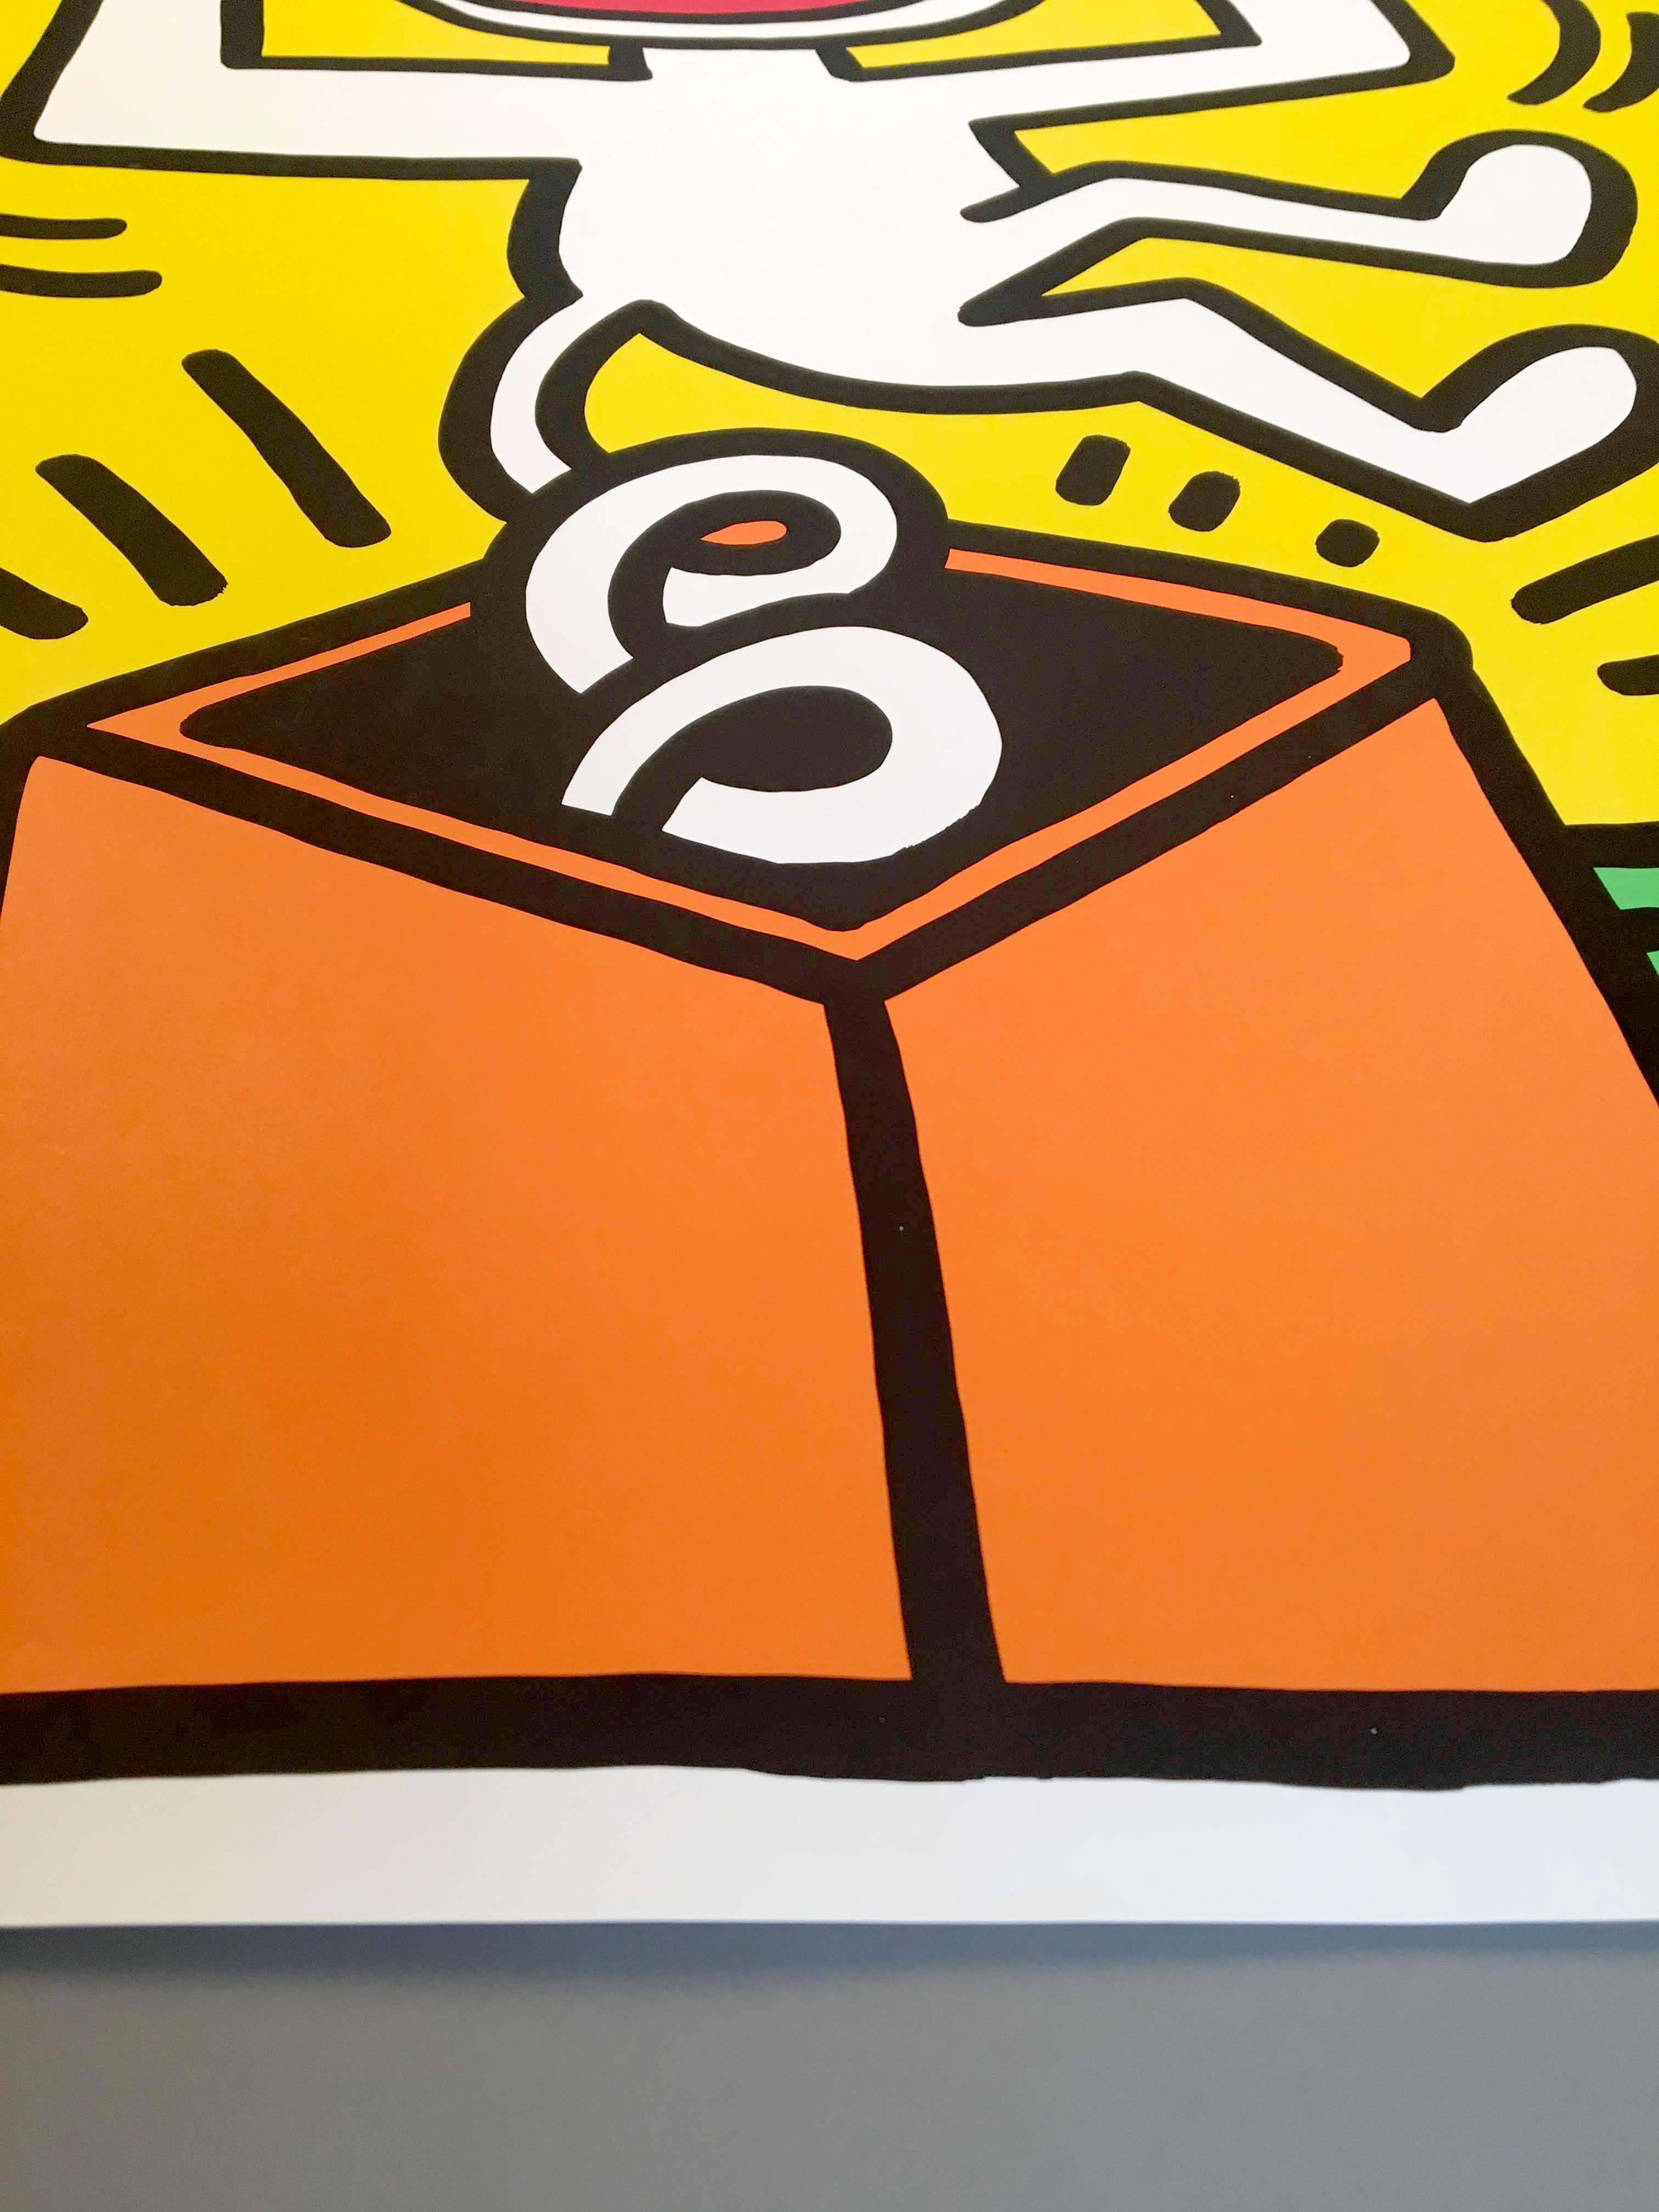 Keith Haring 'Lucky Strike II' Rare Original 1987 Poster Print on Wove Paper In Excellent Condition For Sale In Frederiksberg, Copenhagen